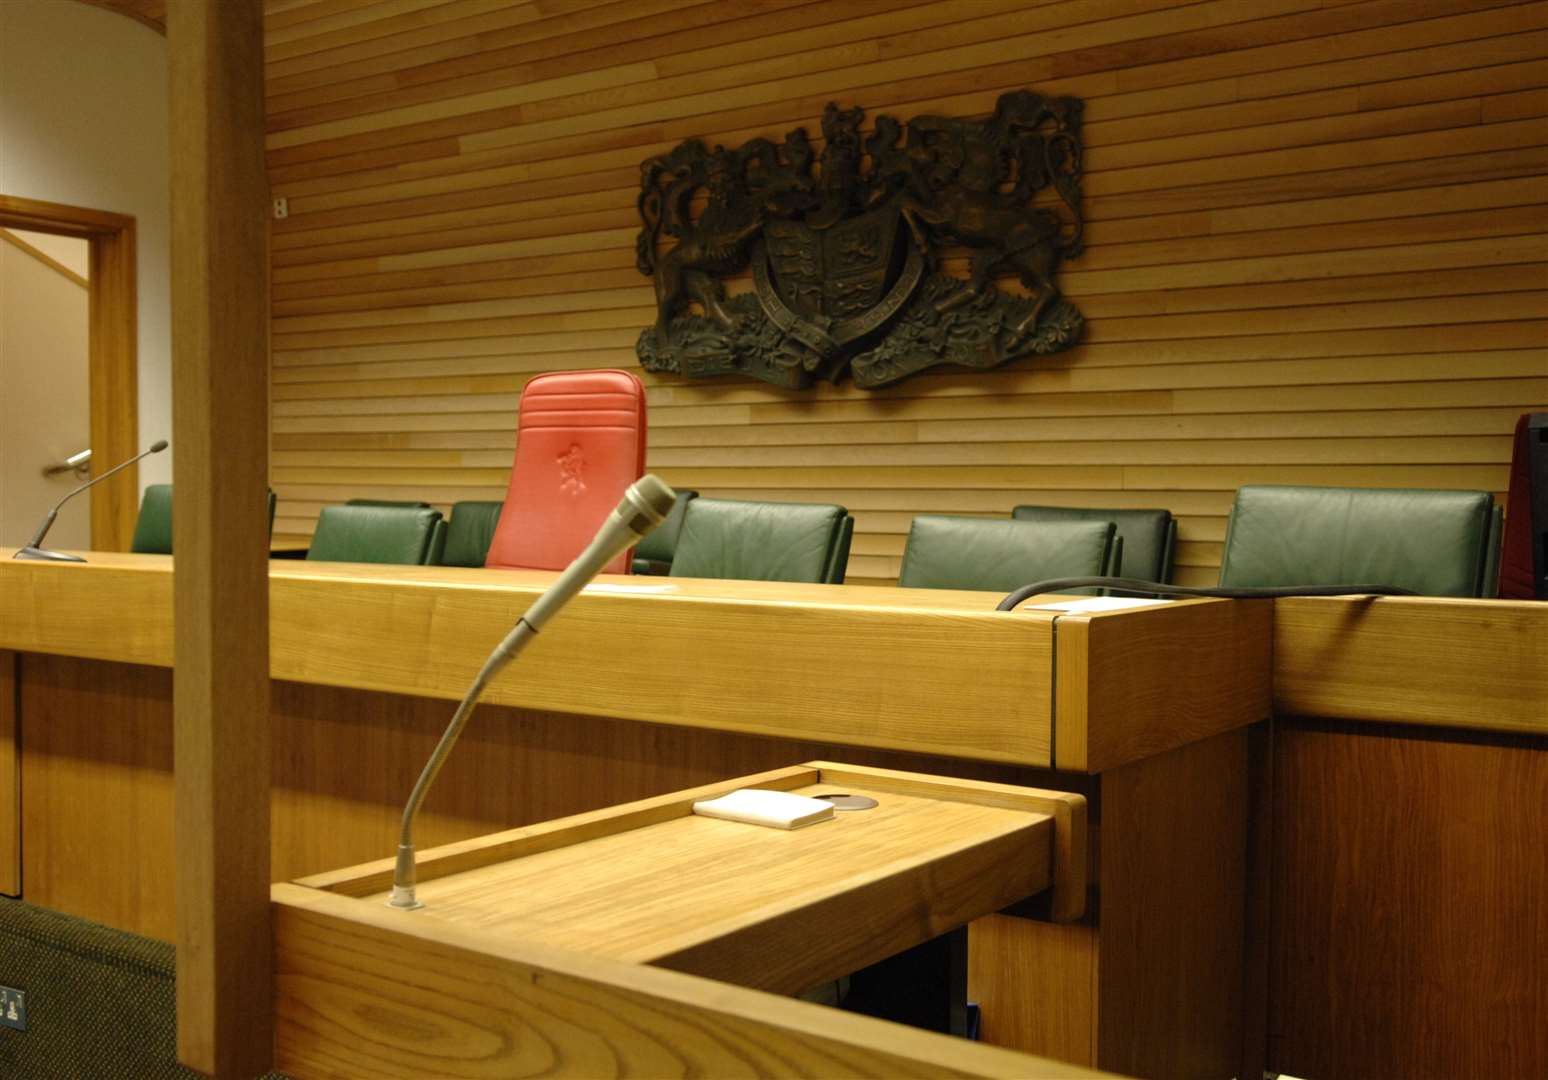 If someone gives evidence from the witness box, it is then cleaned before another witness is allowed to take the stand. Stock picture: Matthew Walker